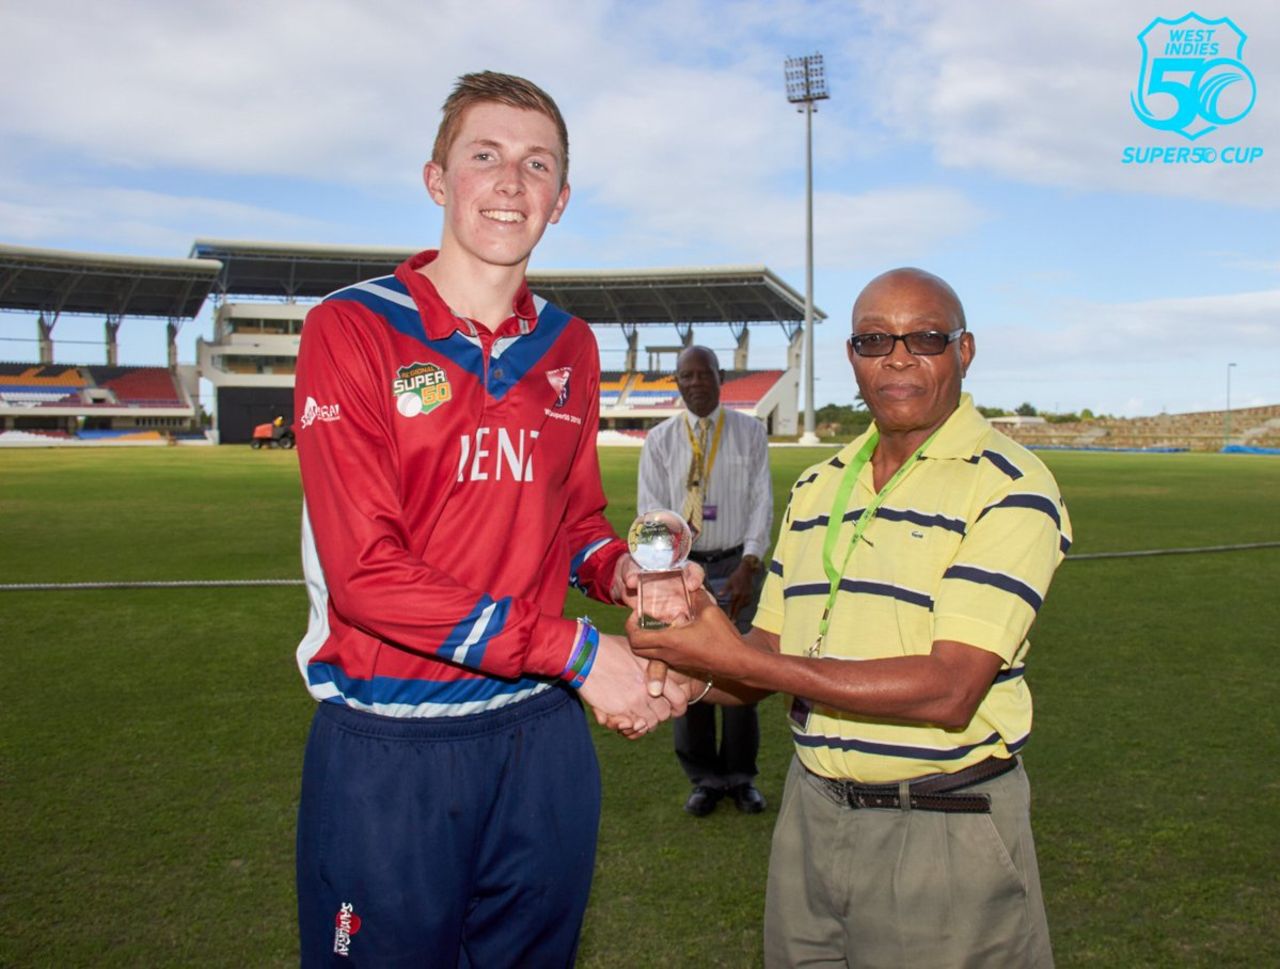 Zak Crawley was Man of the Match for his 99 not out, Leewards v Kent, Regional Super50, February 6, 2018